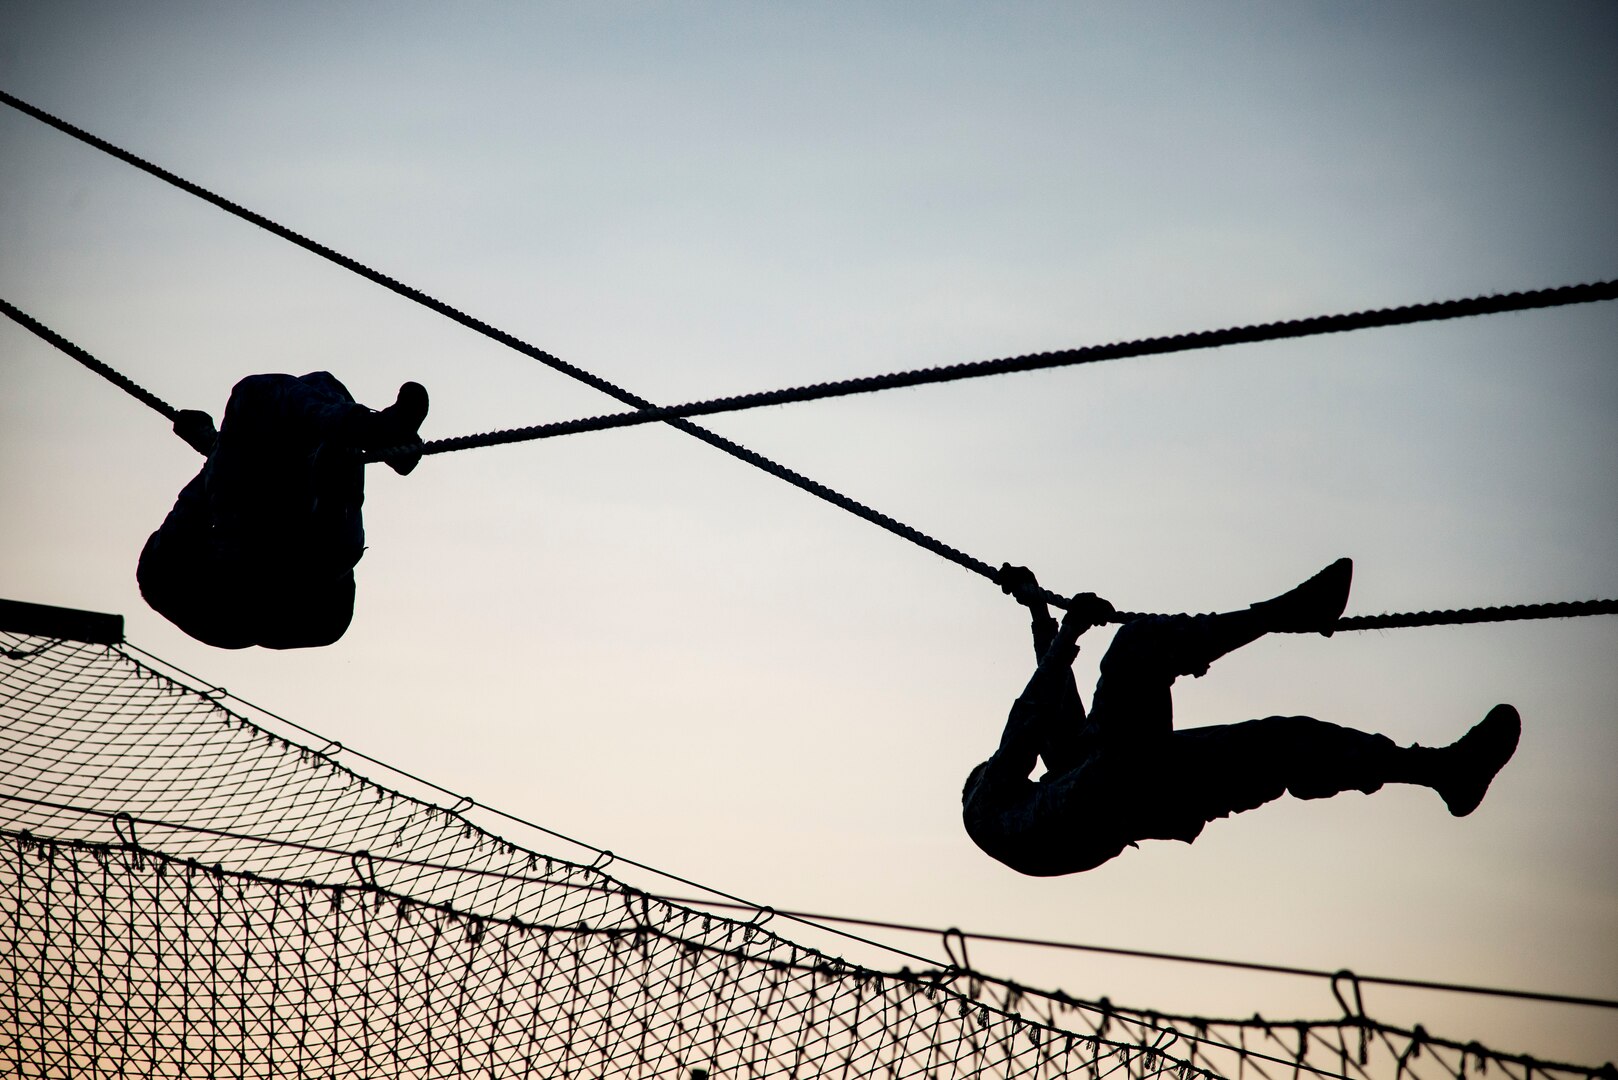 Security Forces Airmen descend a rope July 23, 2018, at Joint Base San Antonio-Camp Bullis, Texas in preparation for the 2018 Defender Challenge. The competition will pit security forces teams against each other in realistic weapons, dismounted operations and relay challenge events. (U.S. Air Force photo by Senior Airman Stormy Archer)